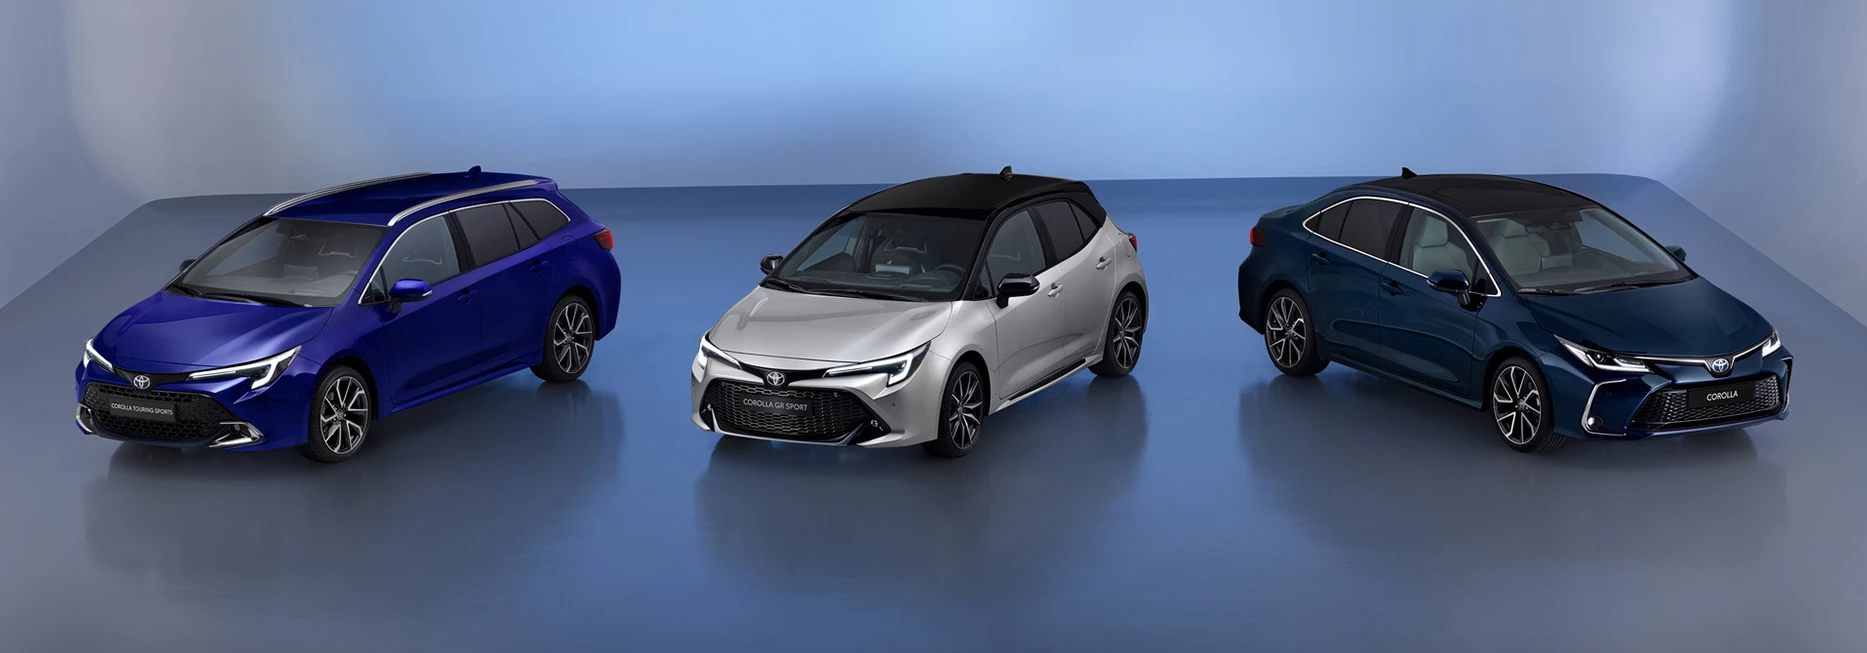 News Landing Image Toyota Corolla Cross Hybrid-2023 affordable model with significant upgrades!